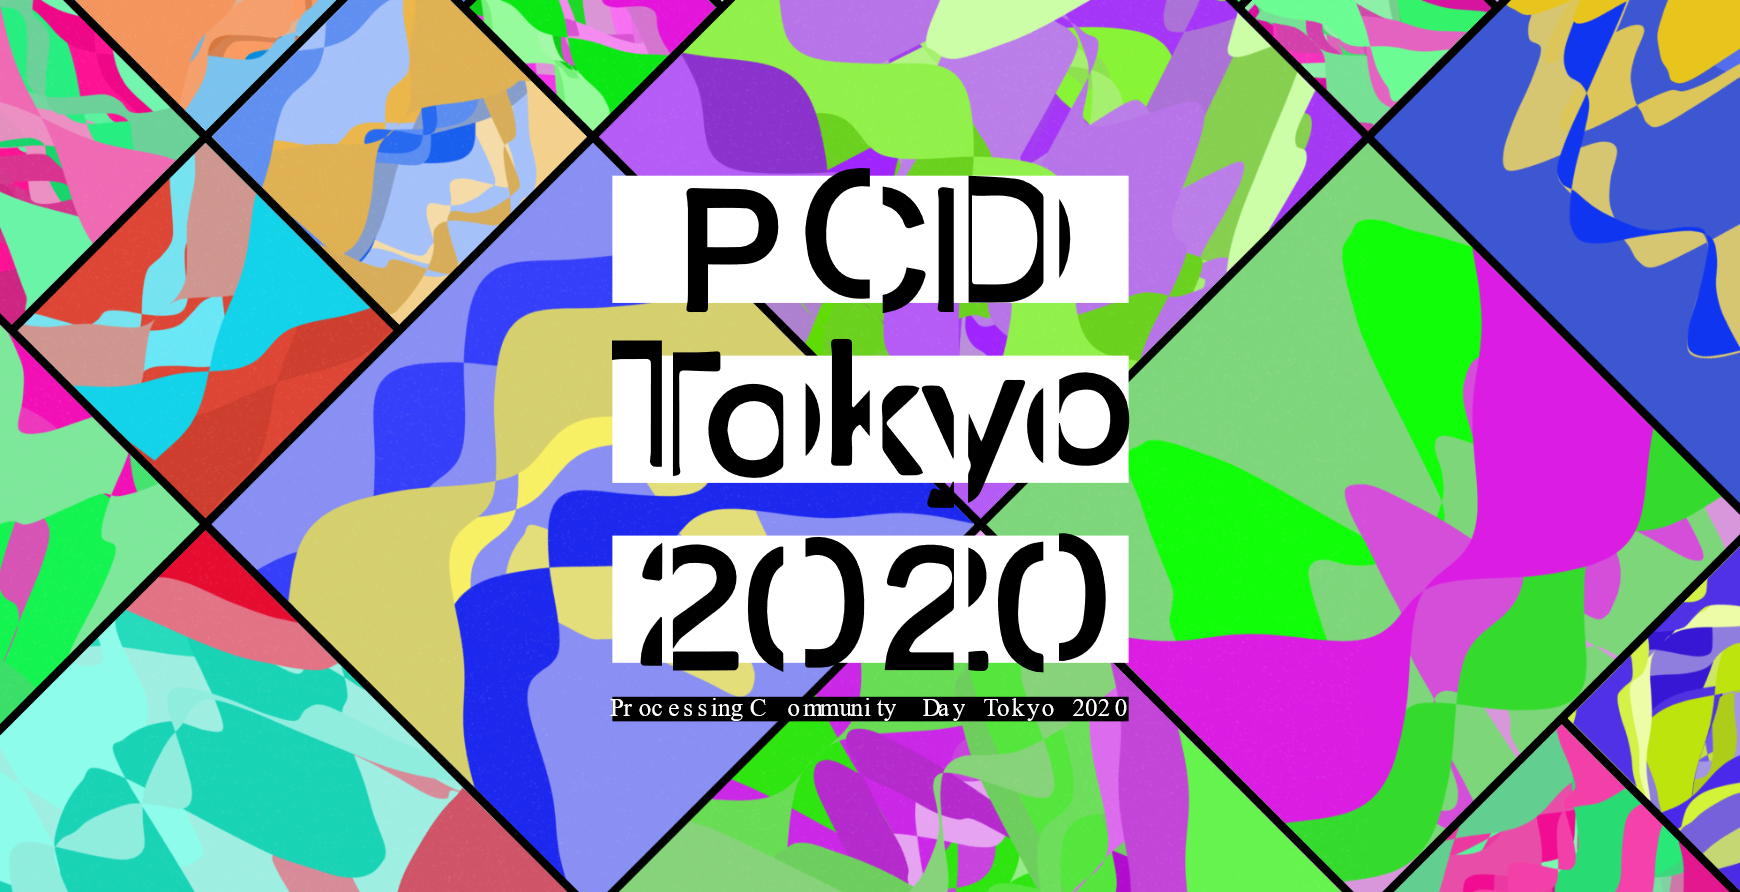 Processing Community Day Tokyo 2020